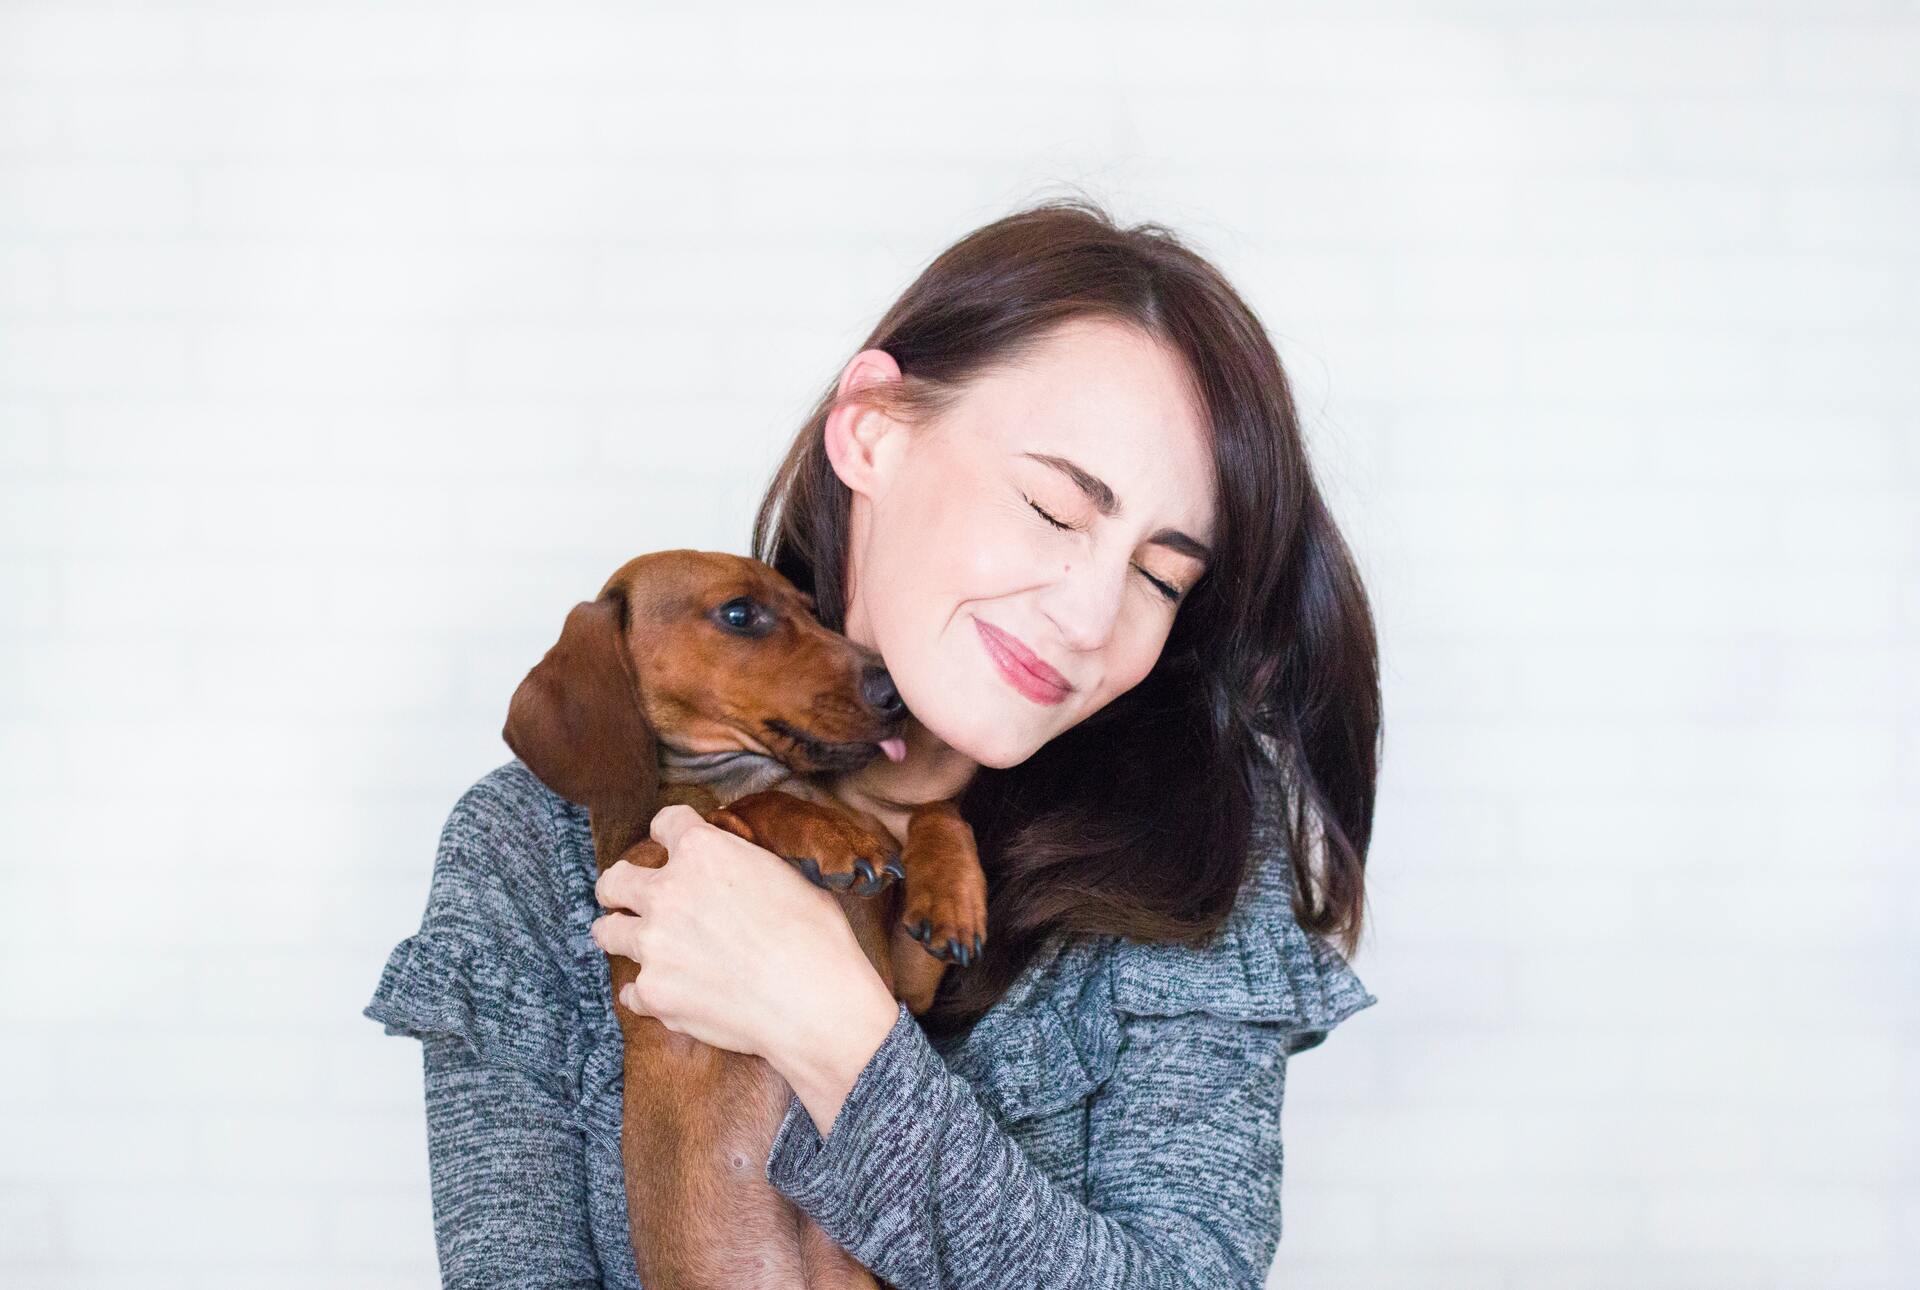 How to make your dog love you – 7 best practices